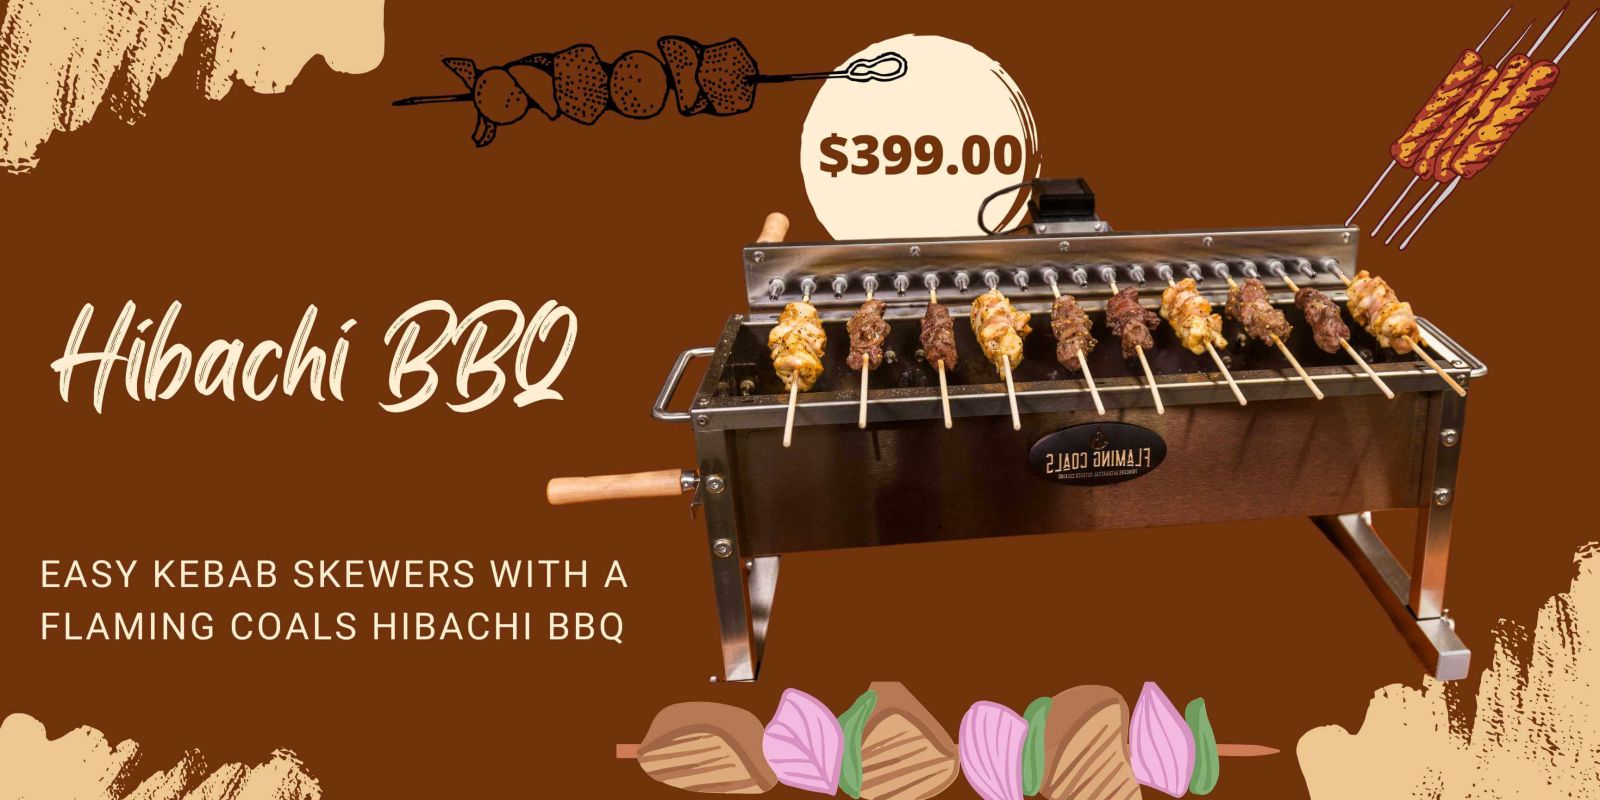 This_image_shows_Hibachi_bbq_with_20_kebab_skewers